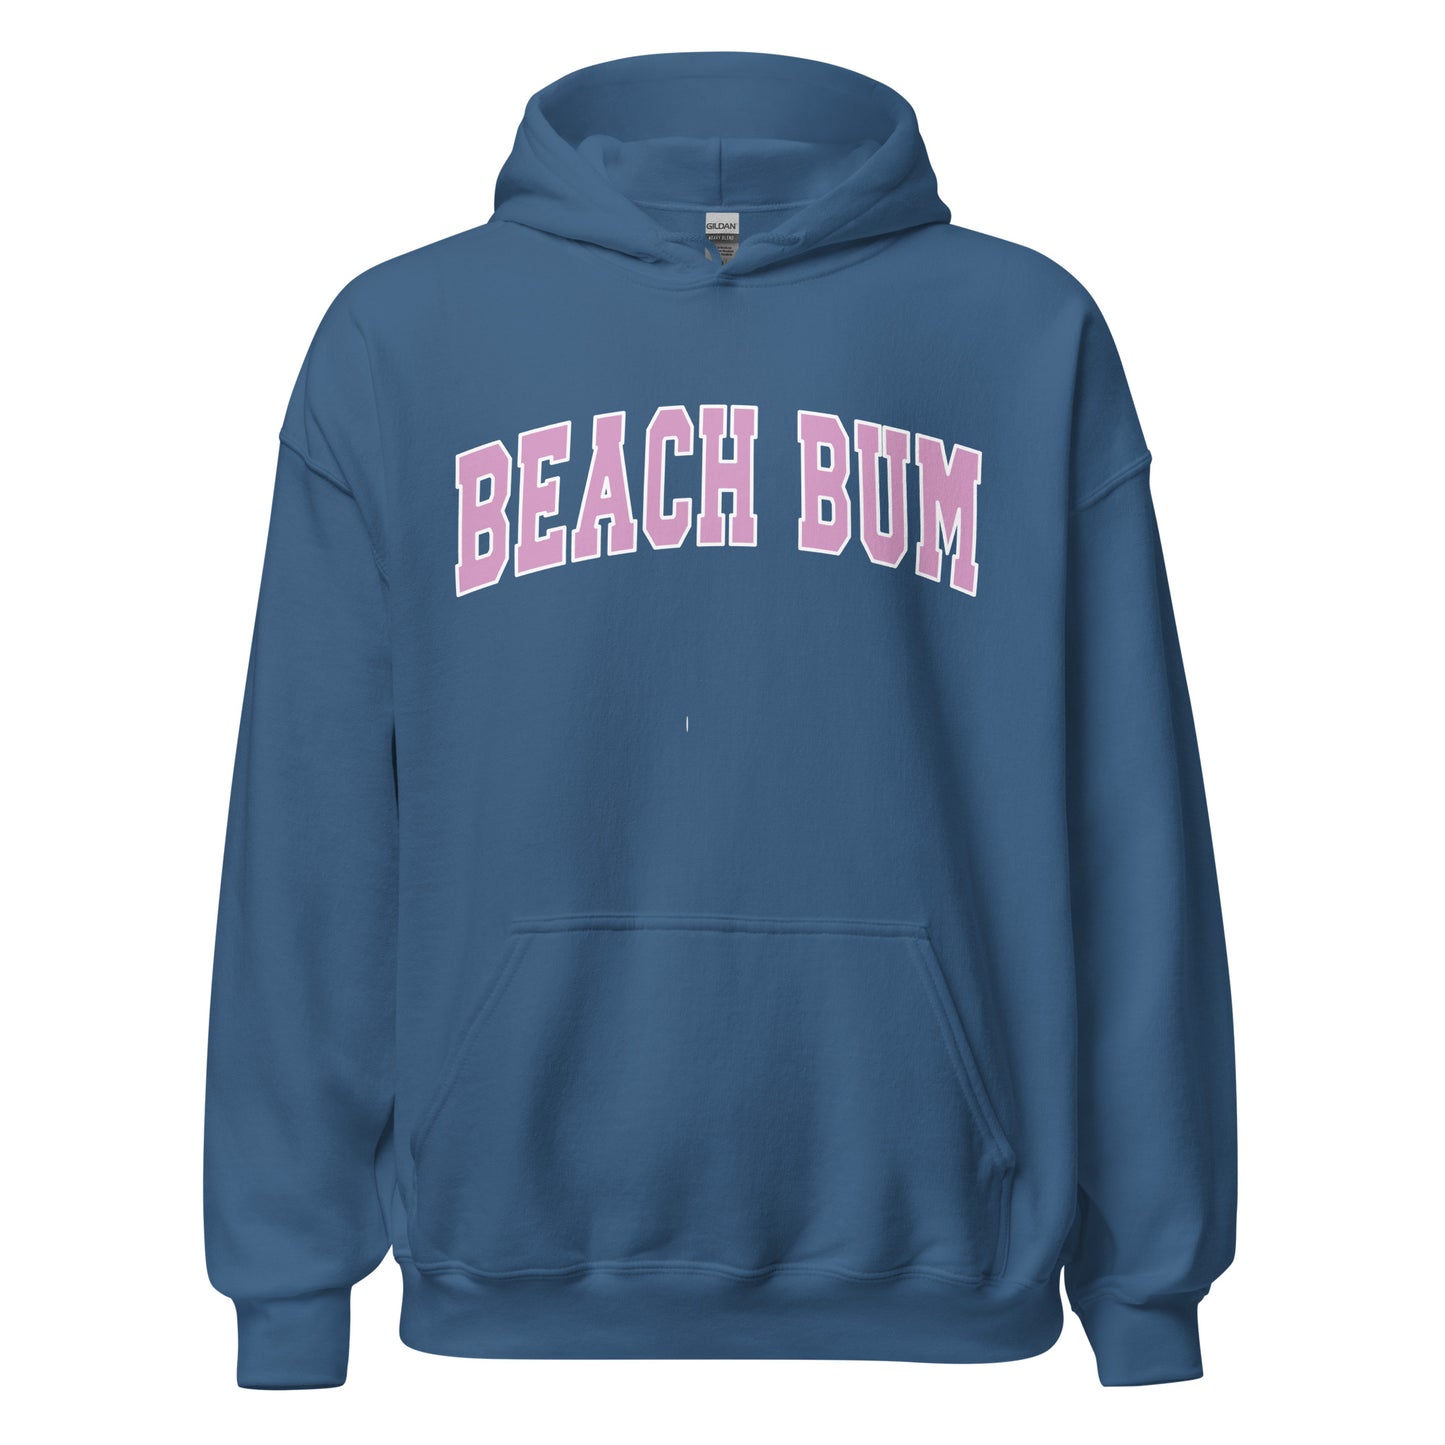 Classic Beach Bum Hoodie, perfect for a oversize look